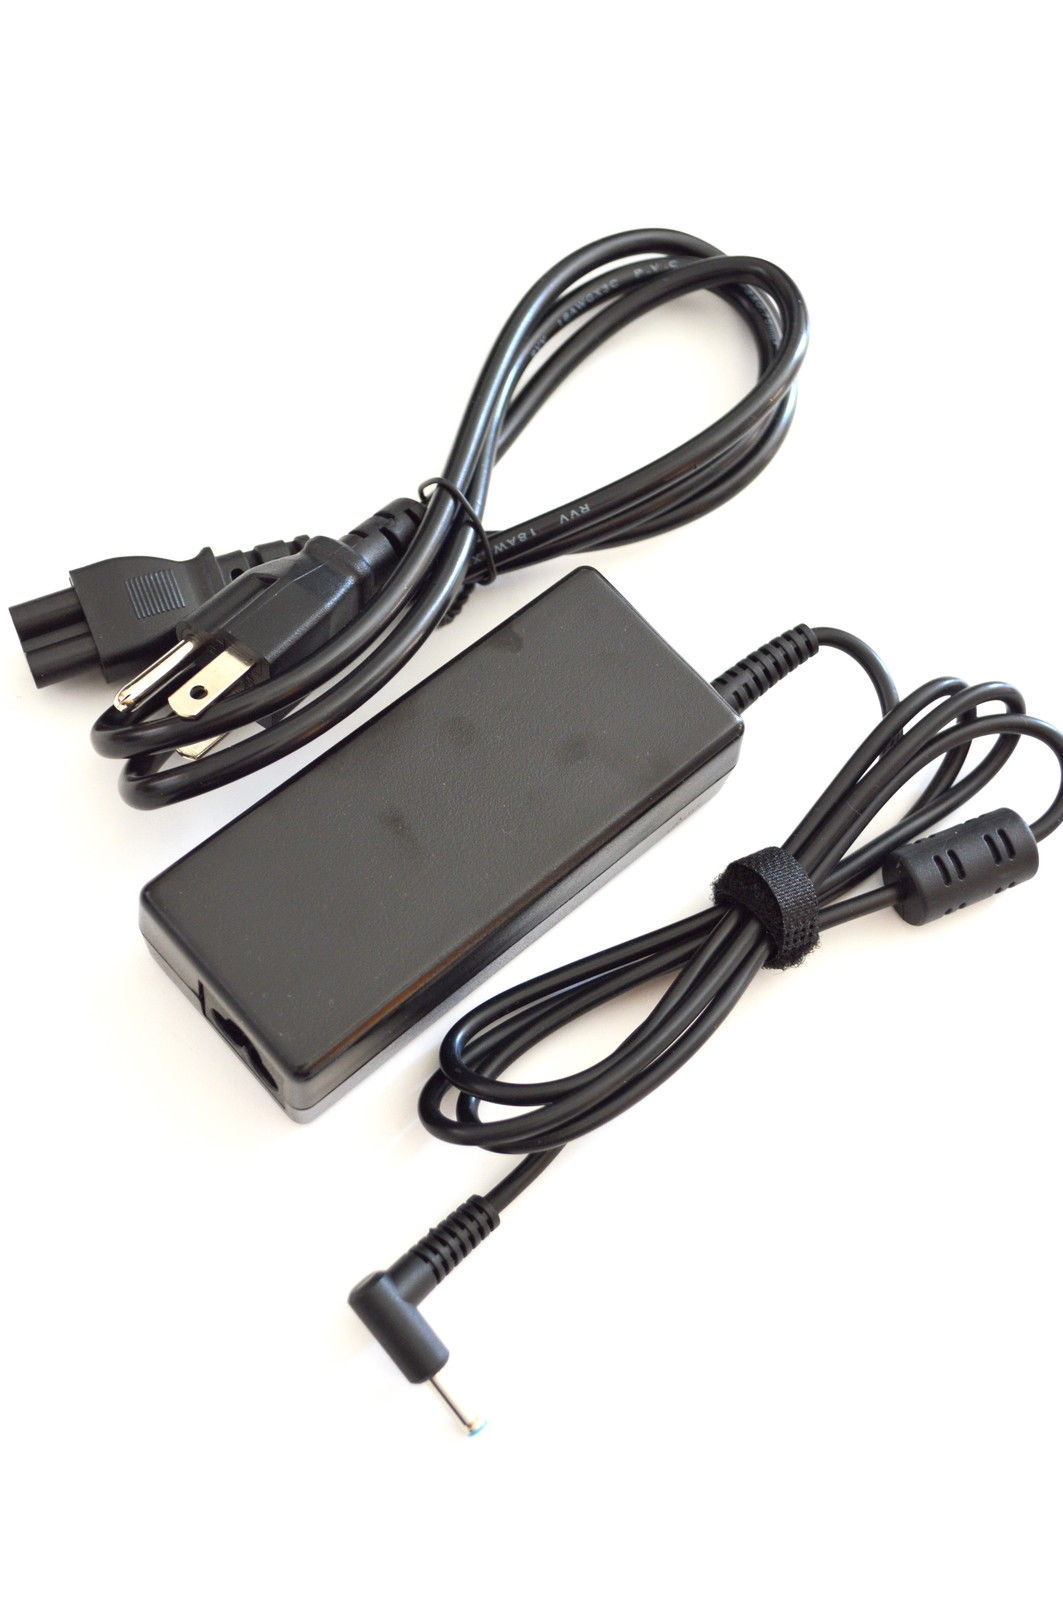 Primary image for AC Adapter Charger for HP Pavilion TouchSmart 15-N098NR, F0Q55UA,11-e000 Laptop